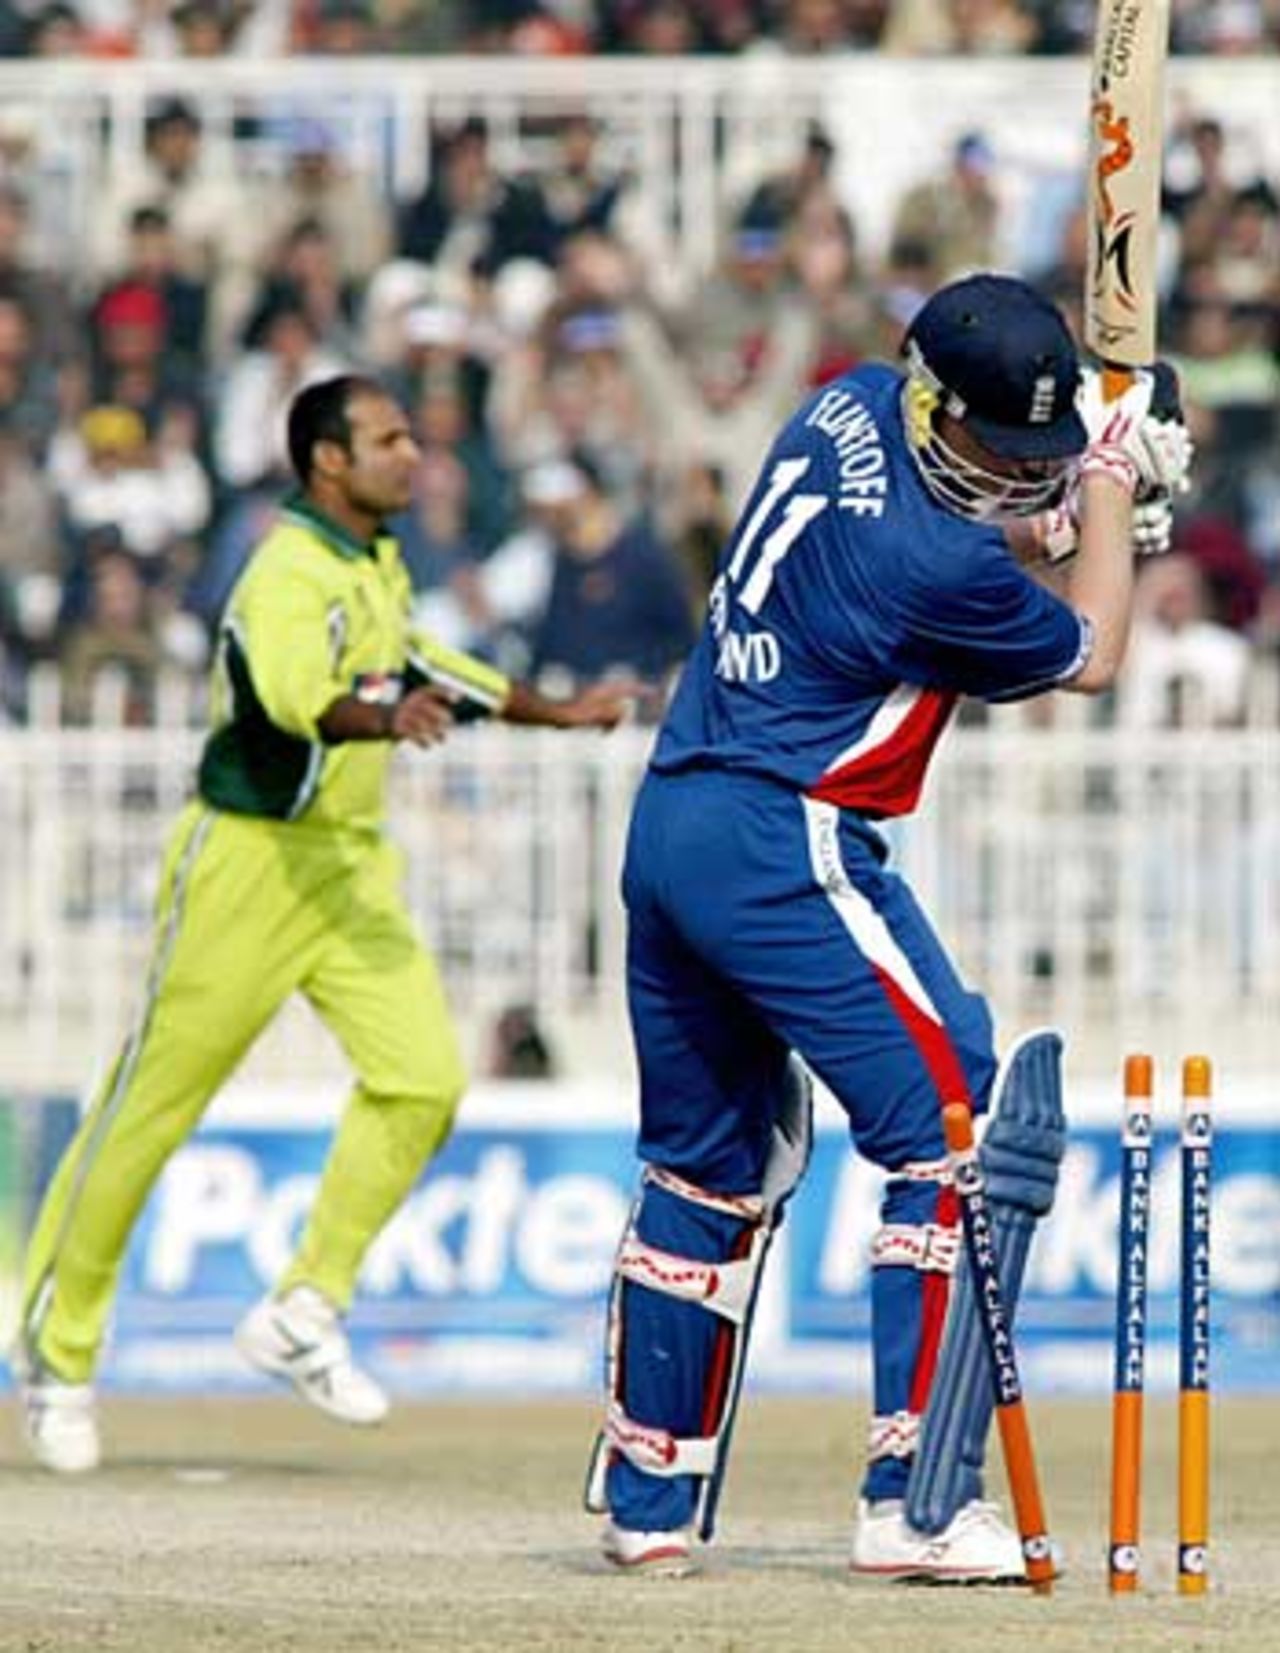 Andrew Flintoff aims a swipe at the stumps after being bowled by Rana Naved-ul-Hasan, Pakistan v England, 5th ODI, Rawalpindi, December 21, 2005